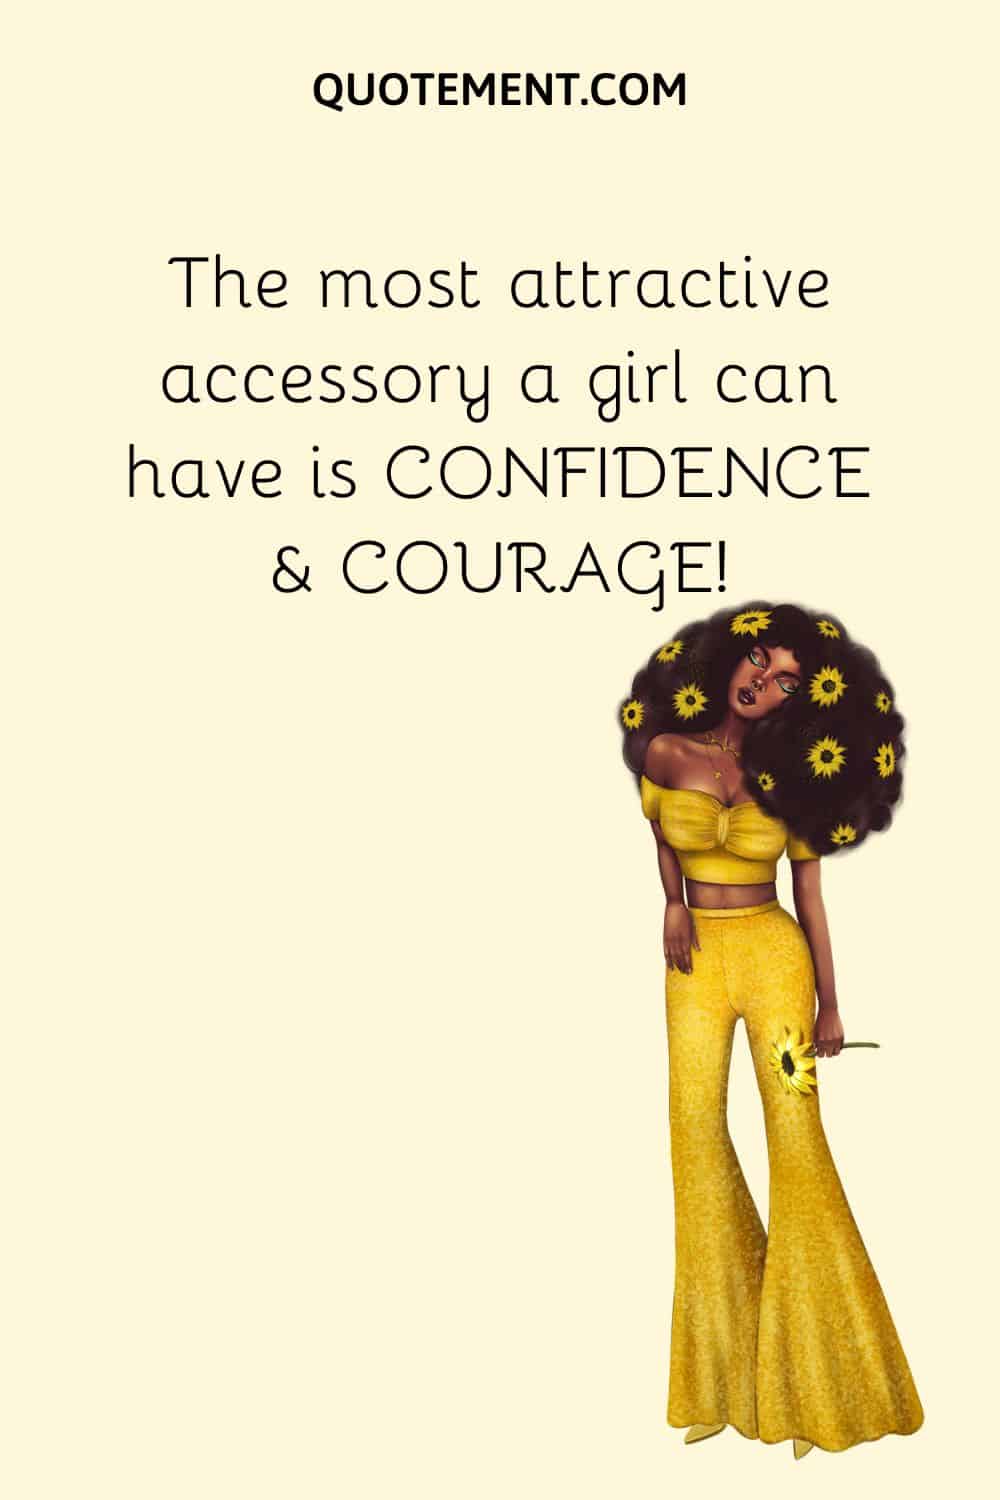 The most attractive accessory a girl can have is CONFIDENCE & COURAGE